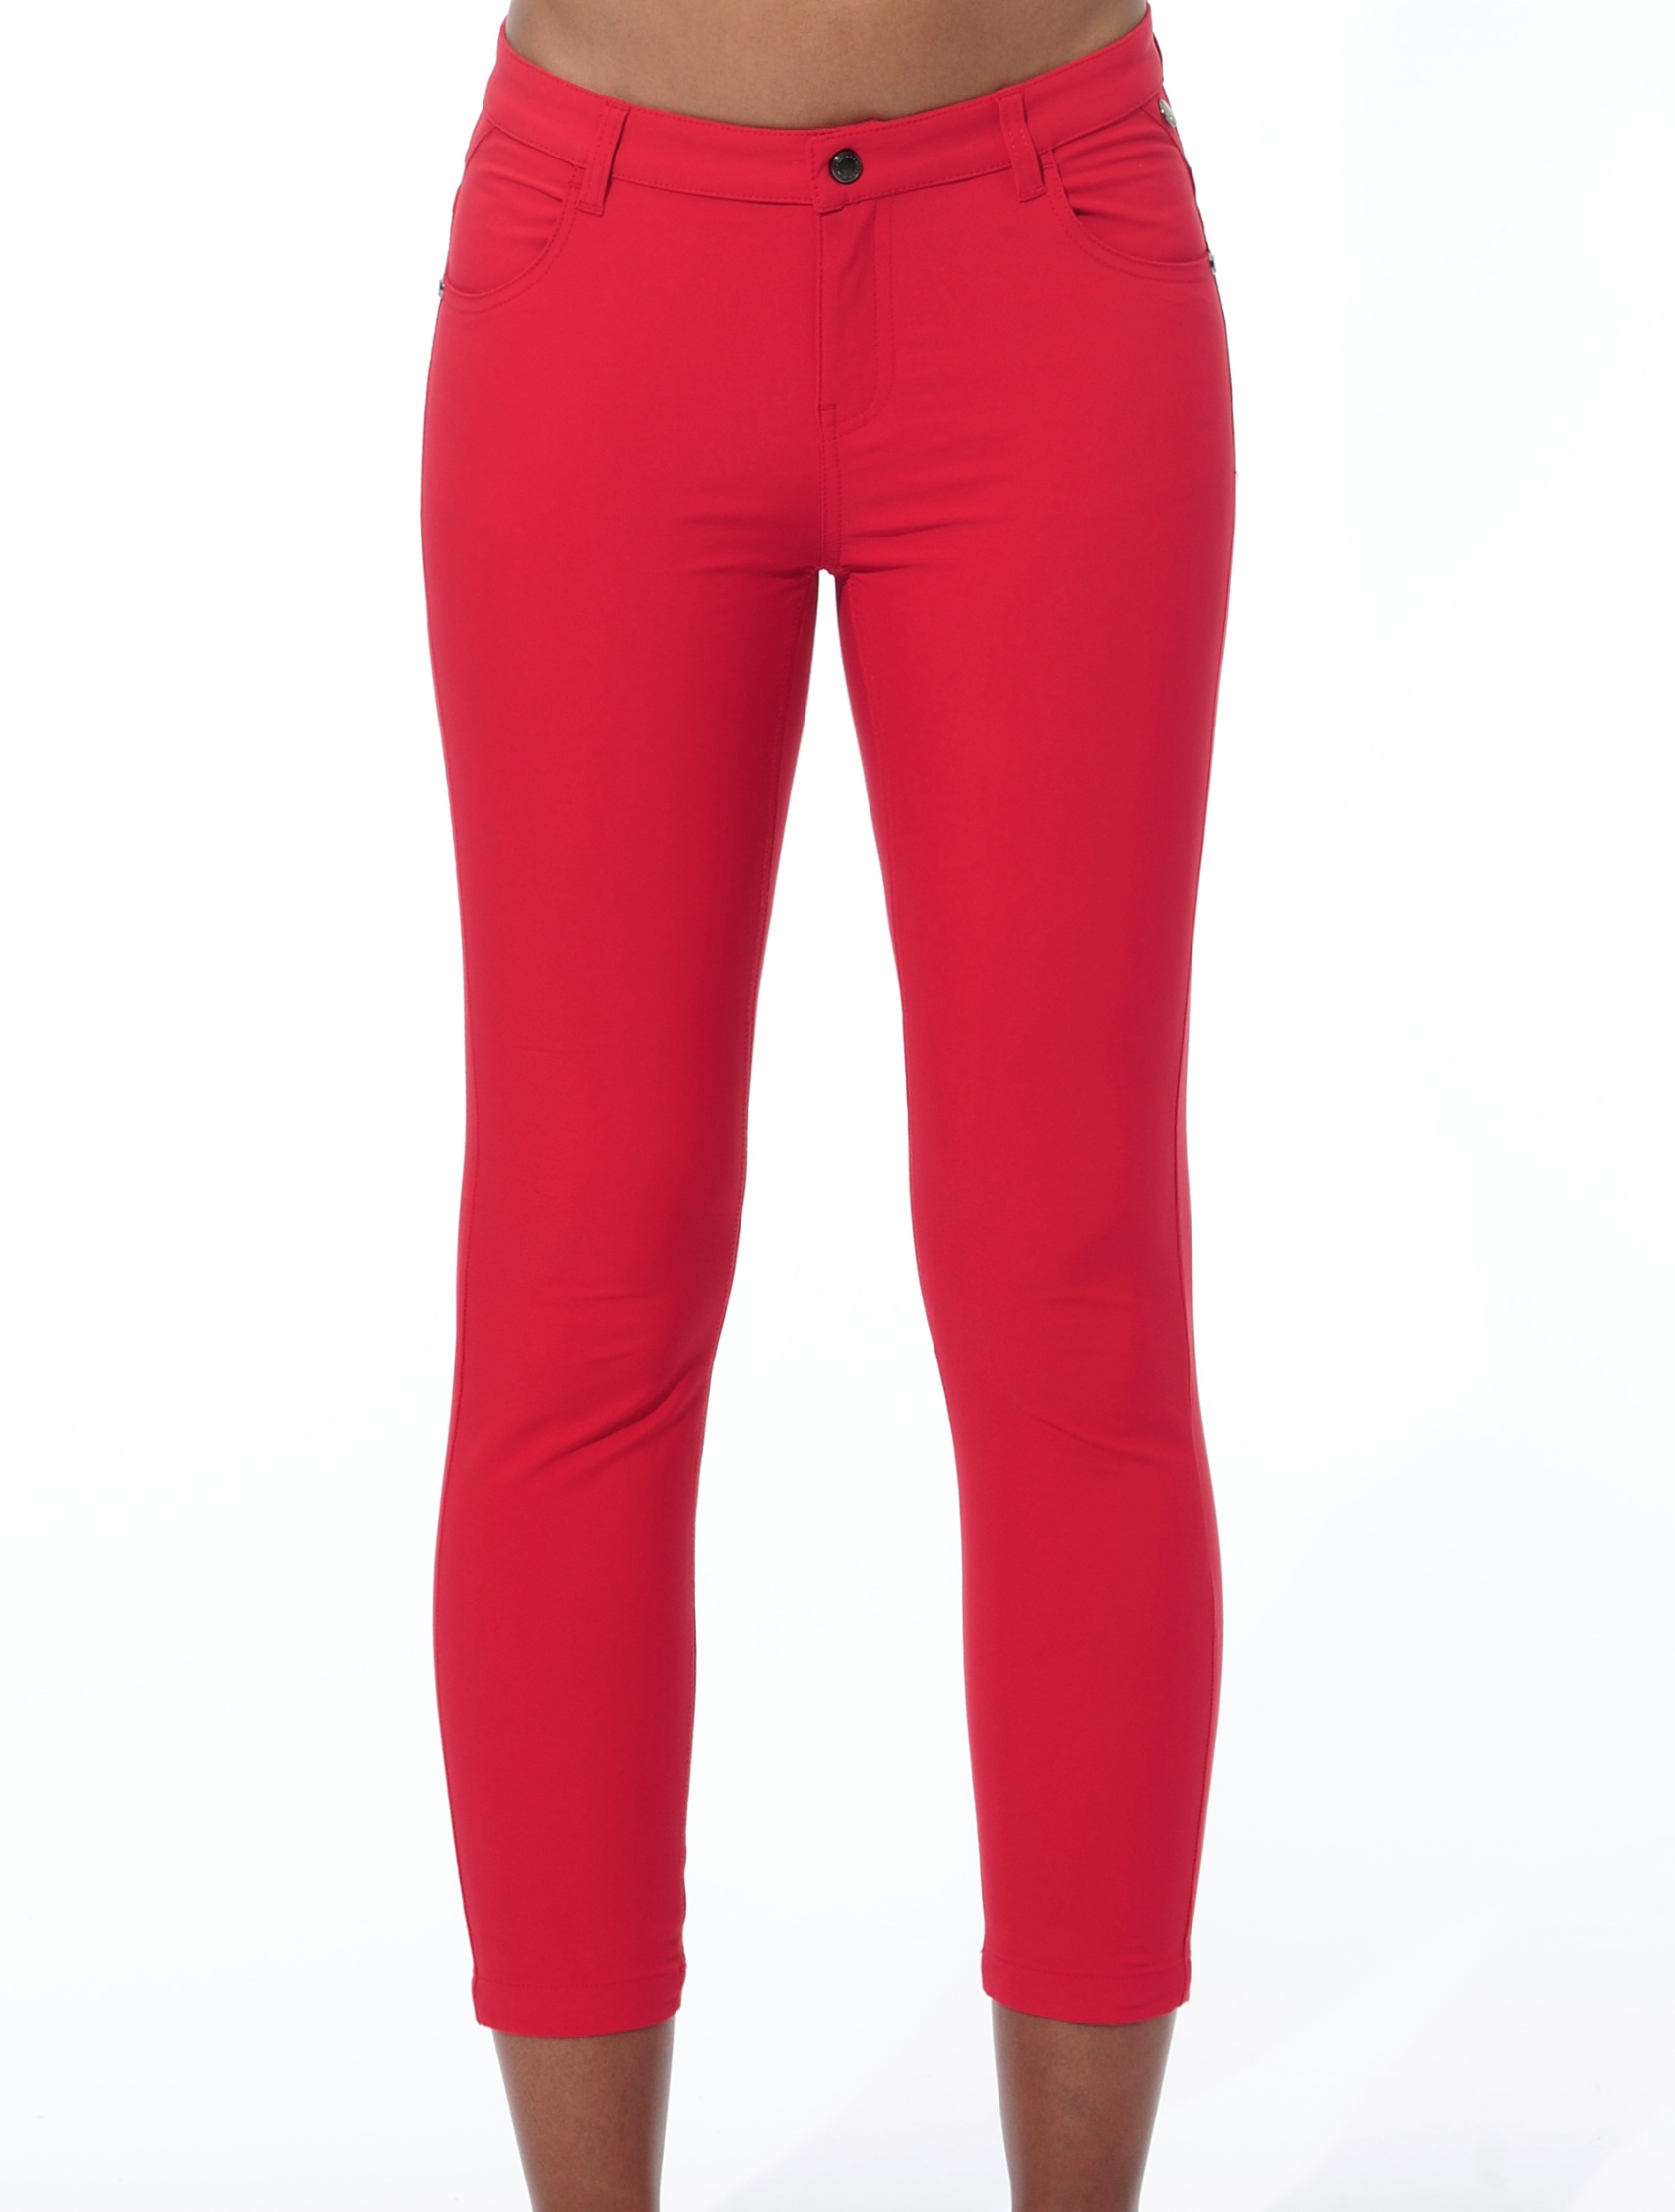 4way stretch cropped 5pockets red 